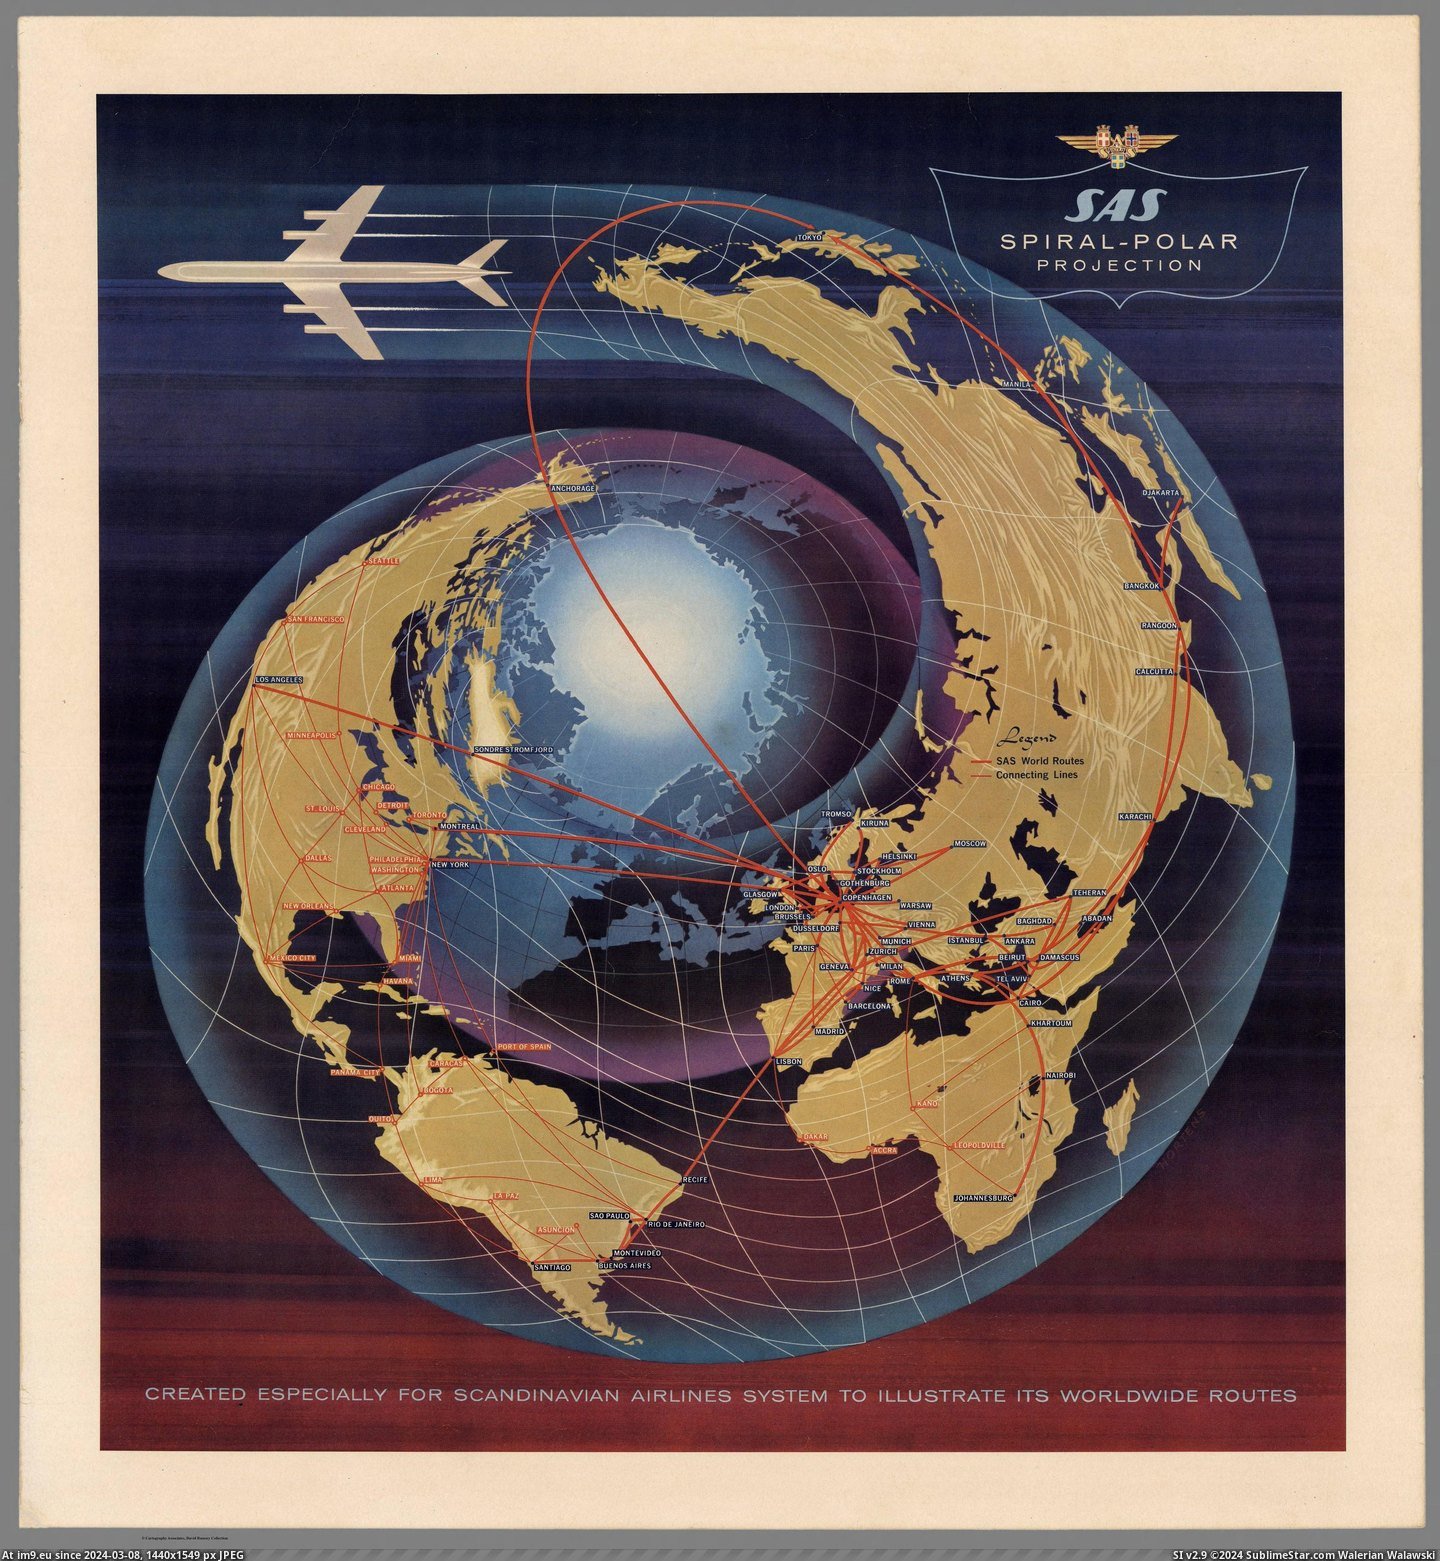 #System #Created #Polar #Worldwide #Illustrate #Scandinavian #Sas #Routes #Projection #Airlines #Spiral [Mapporn] SAS Spiral-Polar Projection. Created Especially for Scandinavian Airlines System to Illustrate Its Worldwide Routes. [ Pic. (Bild von album My r/MAPS favs))